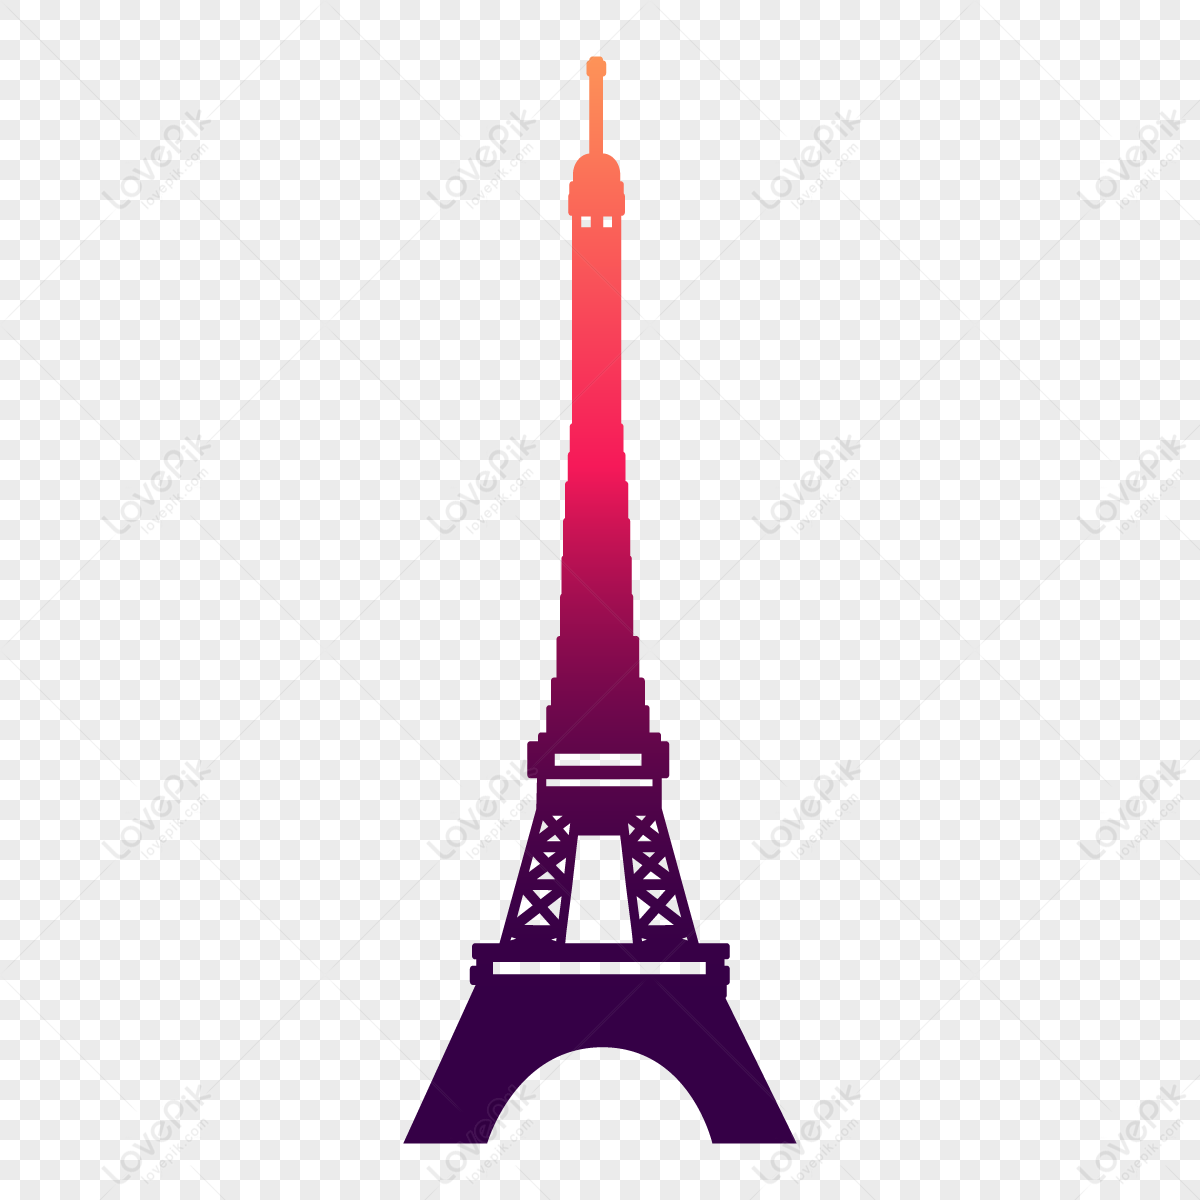 silhouette of eiffel tower, orange tower, light tower, paris tower png hd transparent image